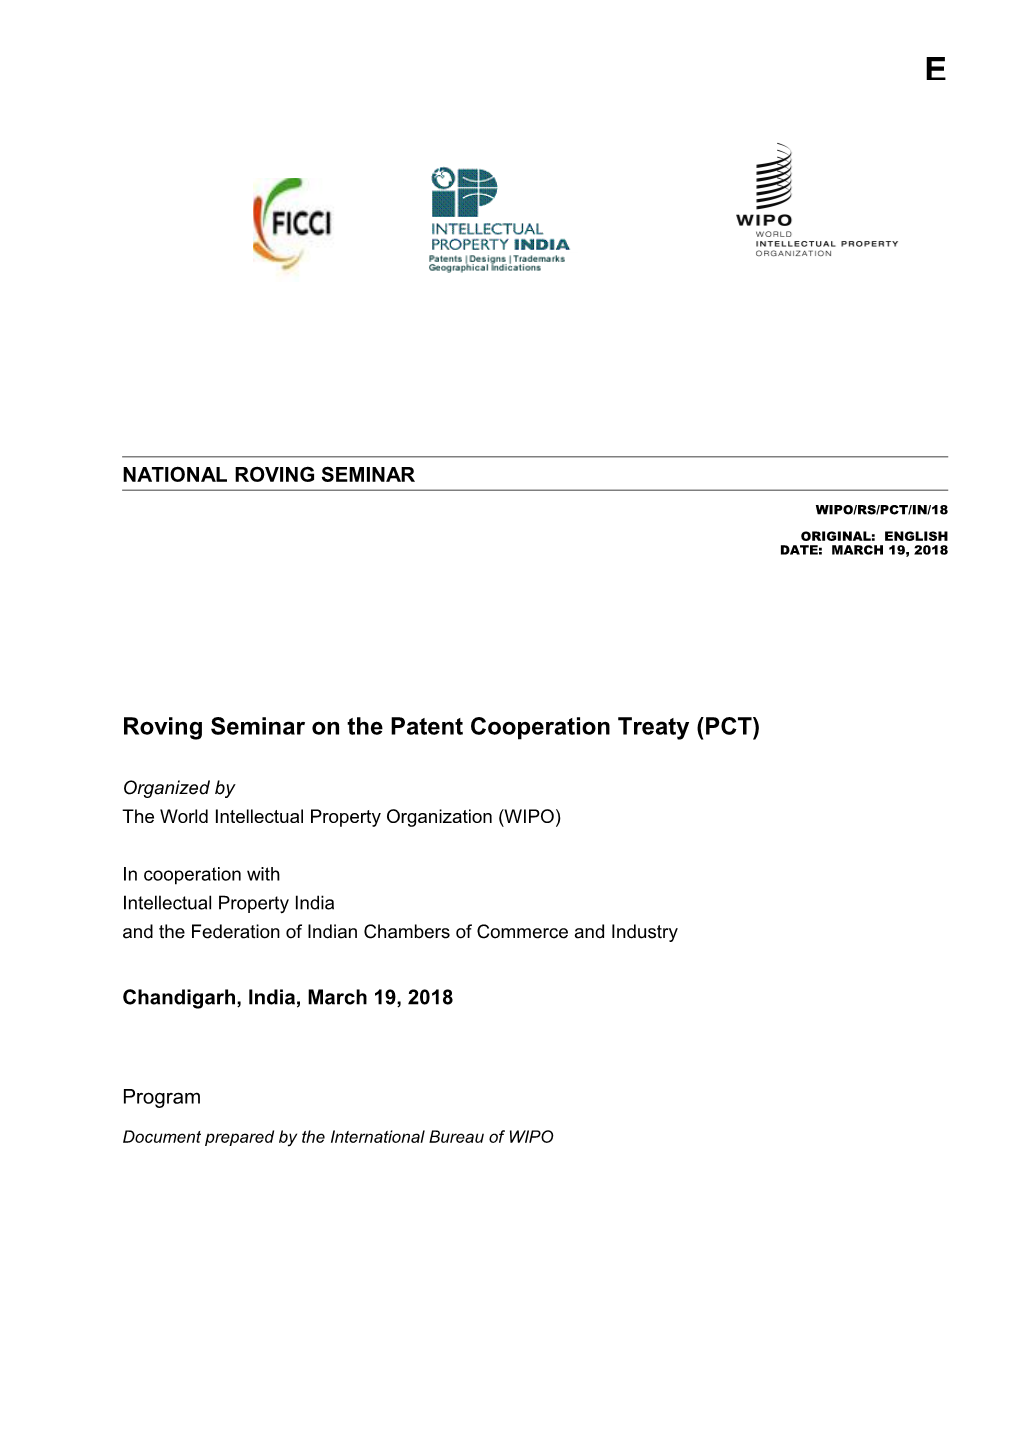 Roving Seminar on the Patent Cooperation Treaty (PCT)